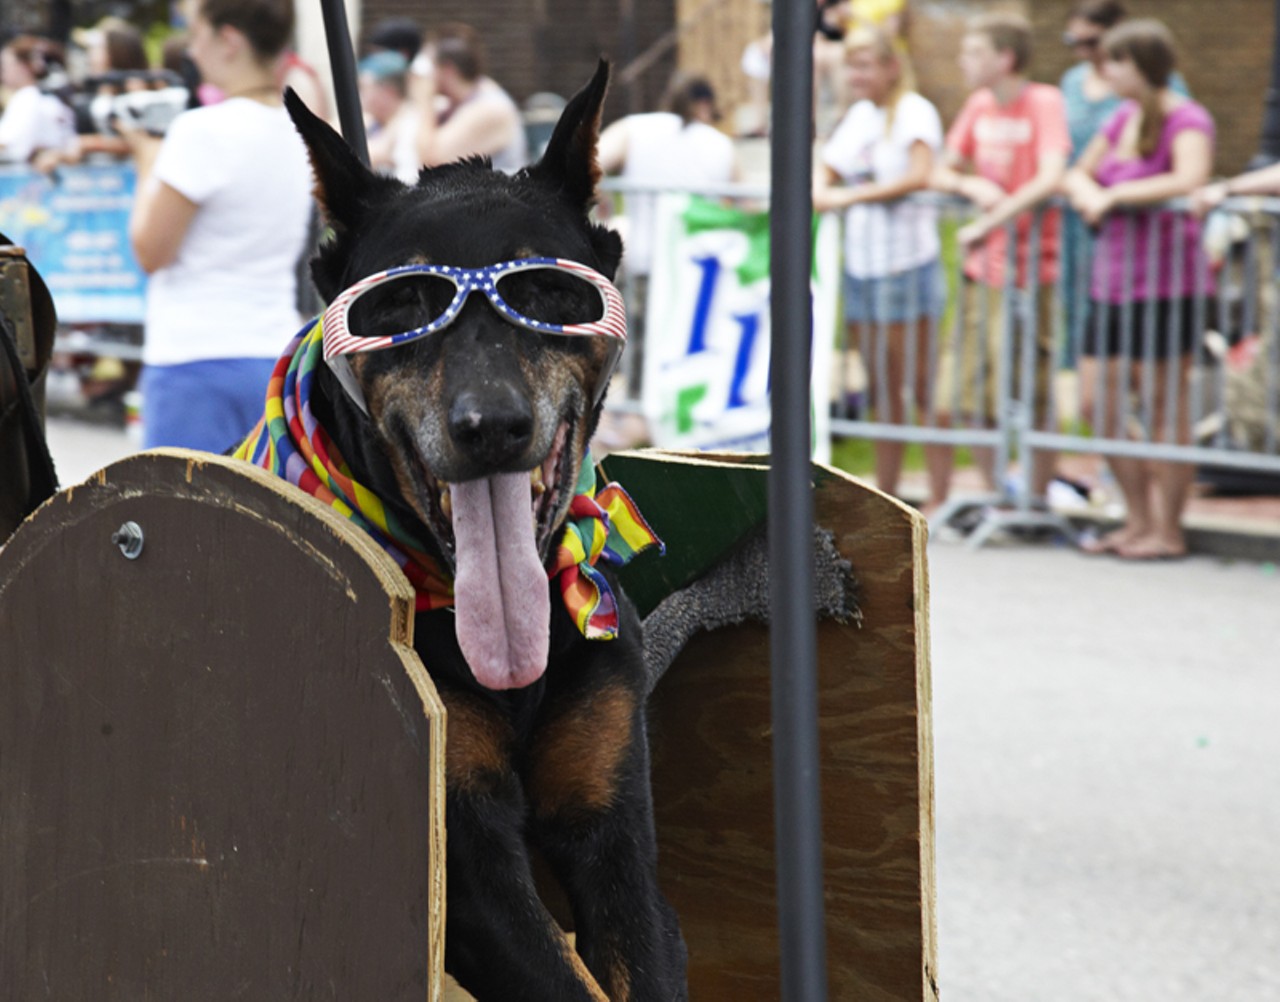 What's a parade without at least one dog in shades?